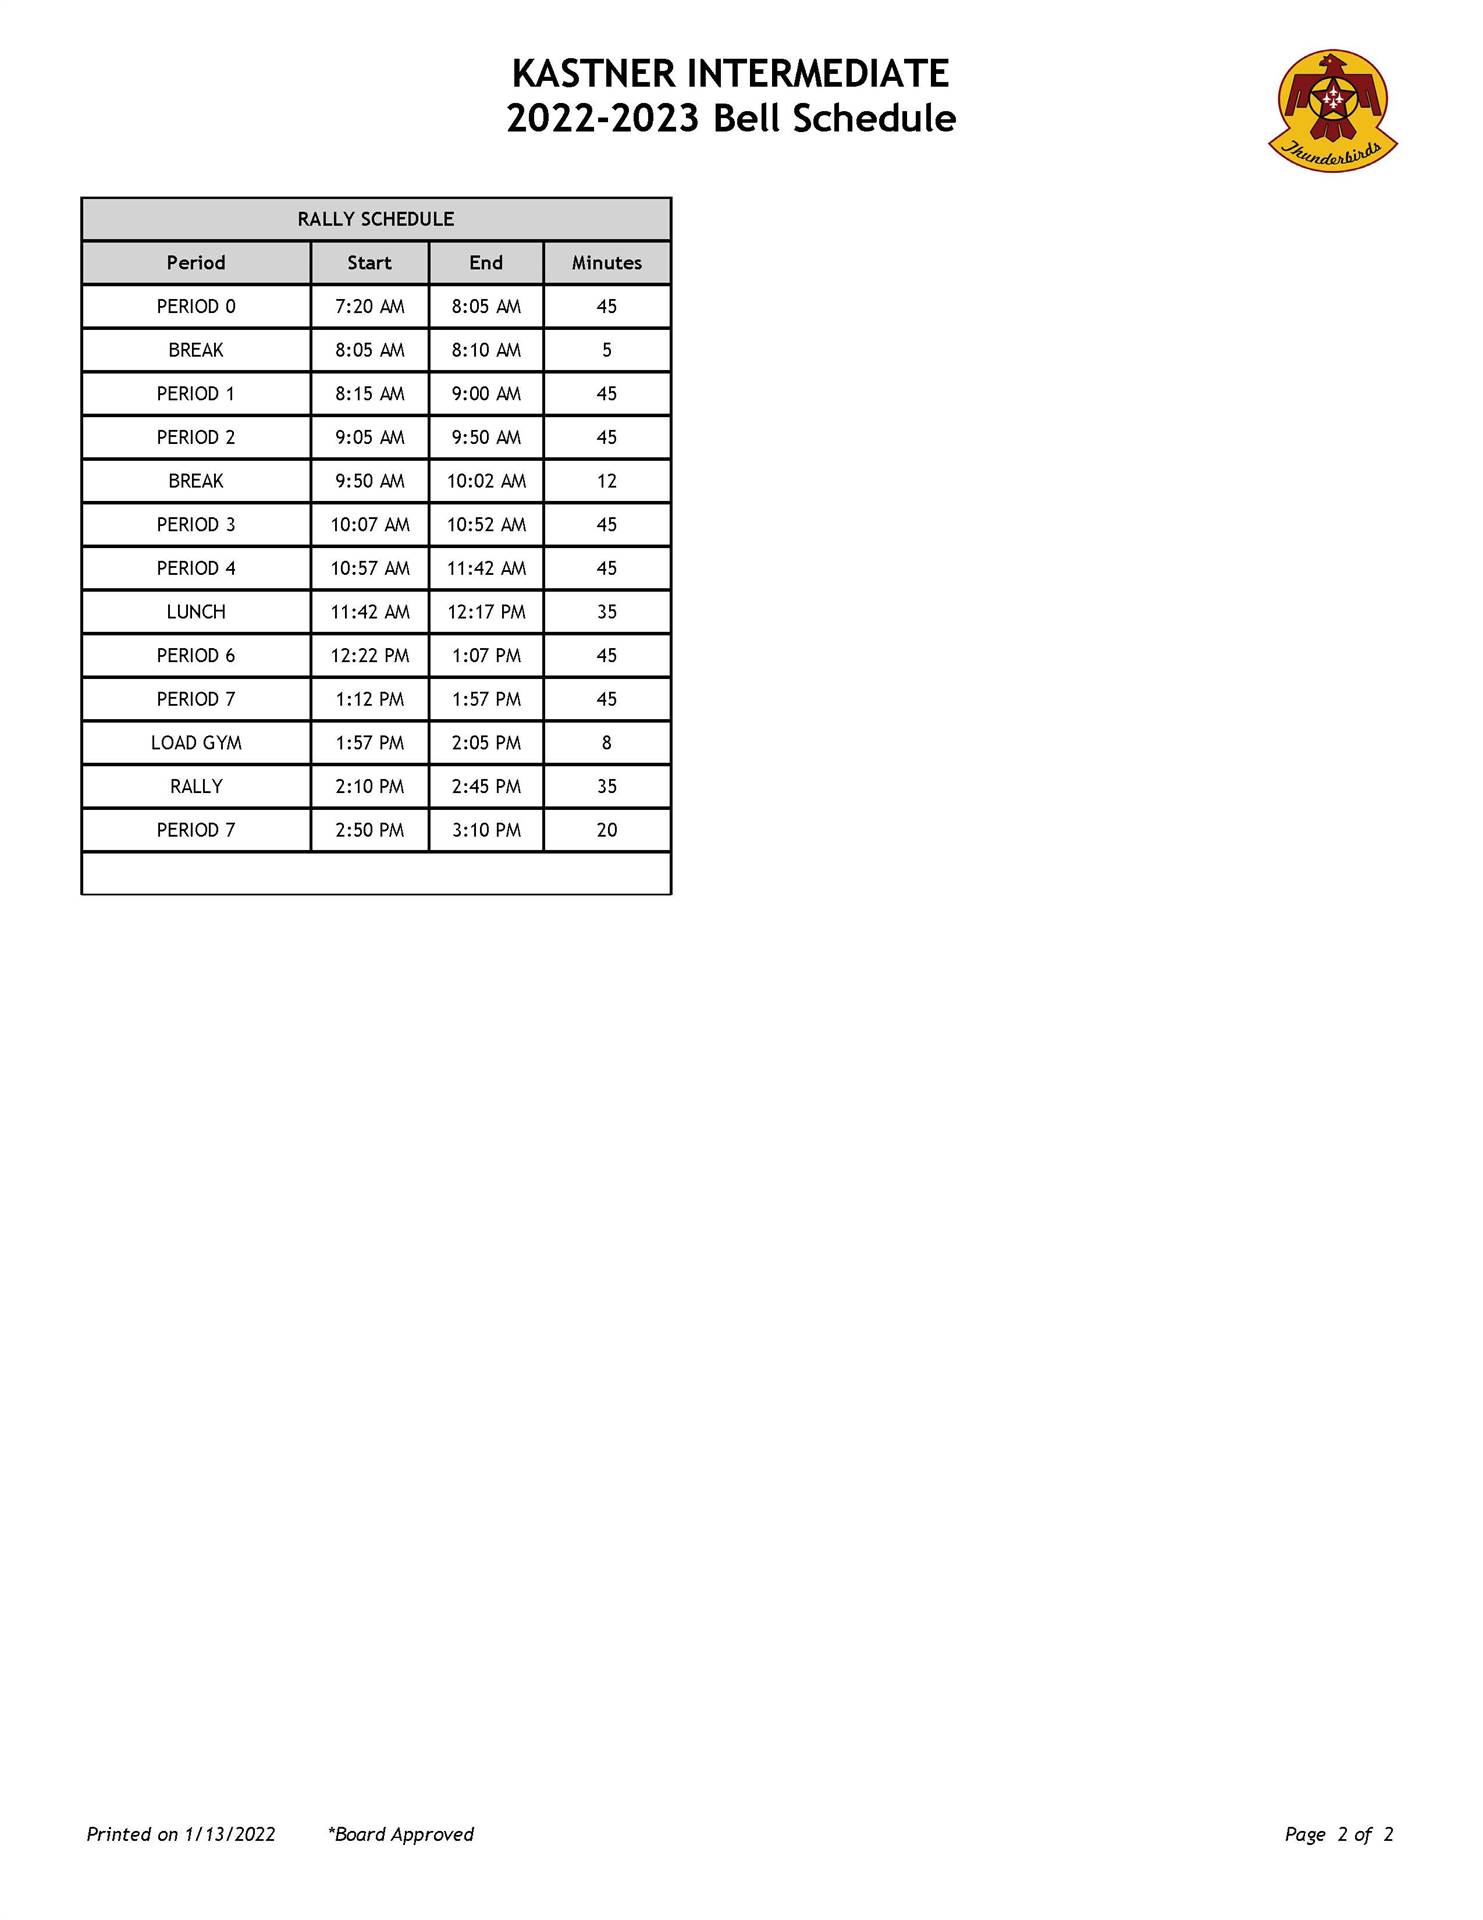 CWHS Area Bell Schedule - full text downloadable below